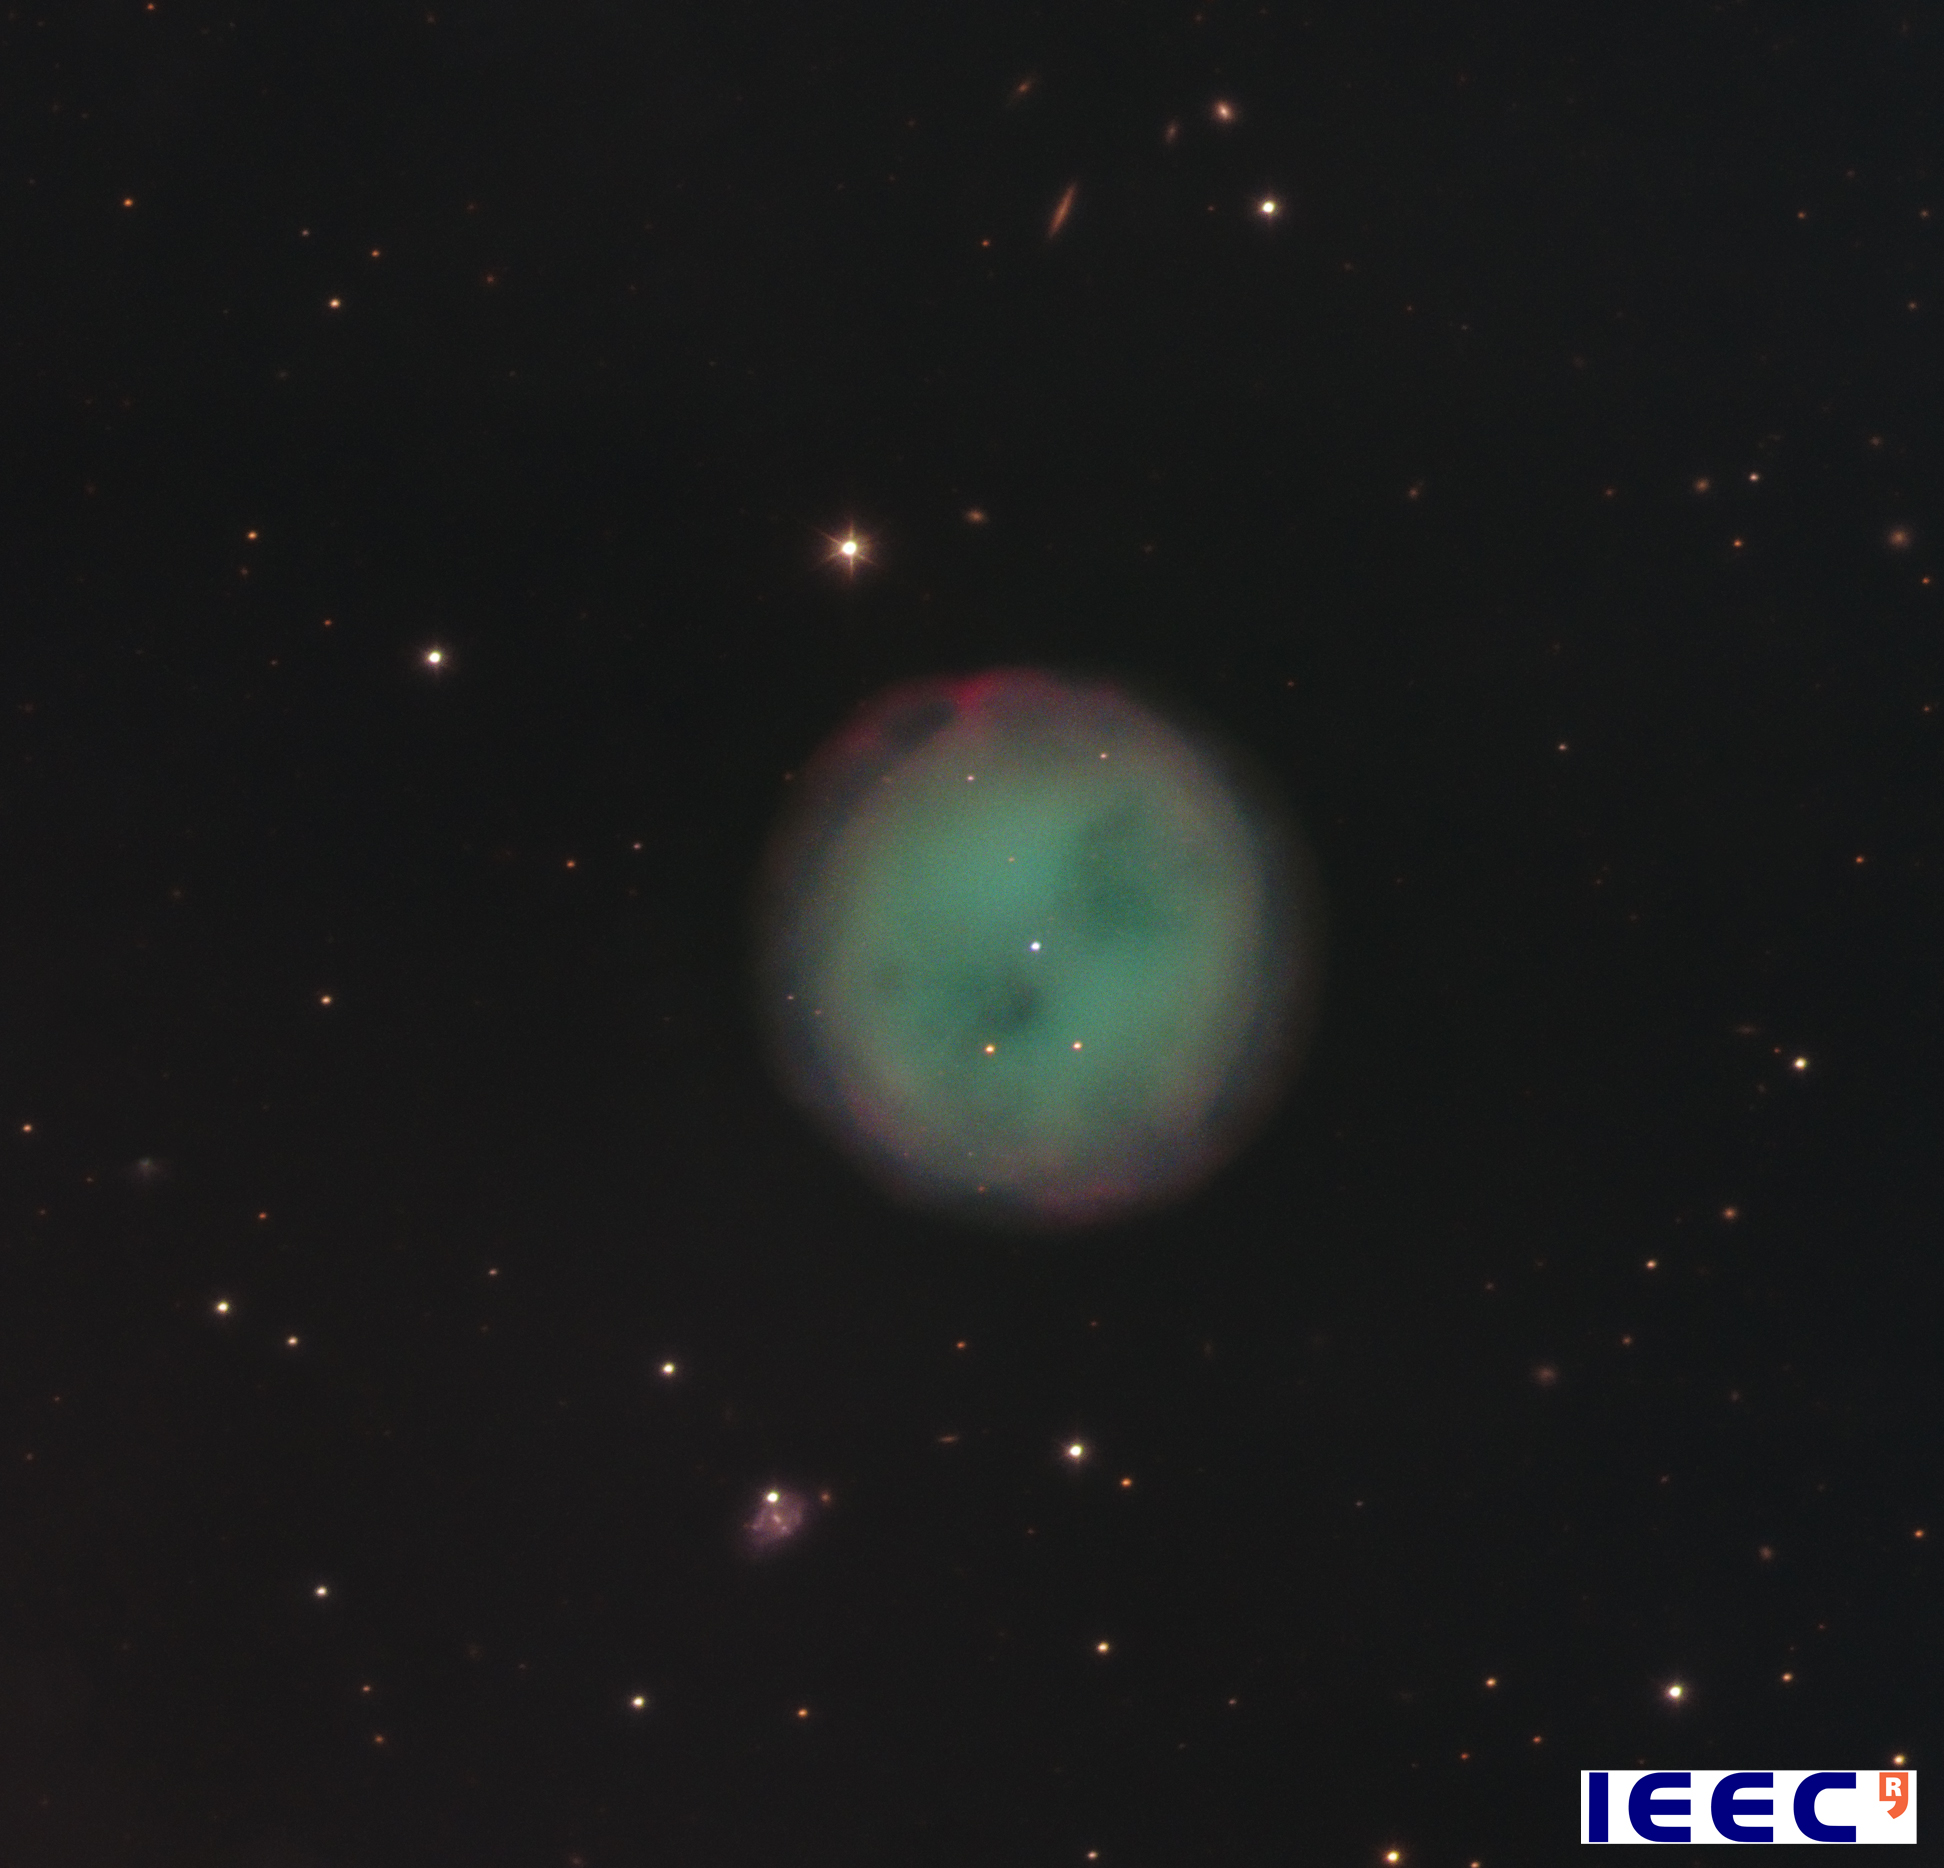 Owl Nebula, picture of March of Observatori Astronòmic del Montsec